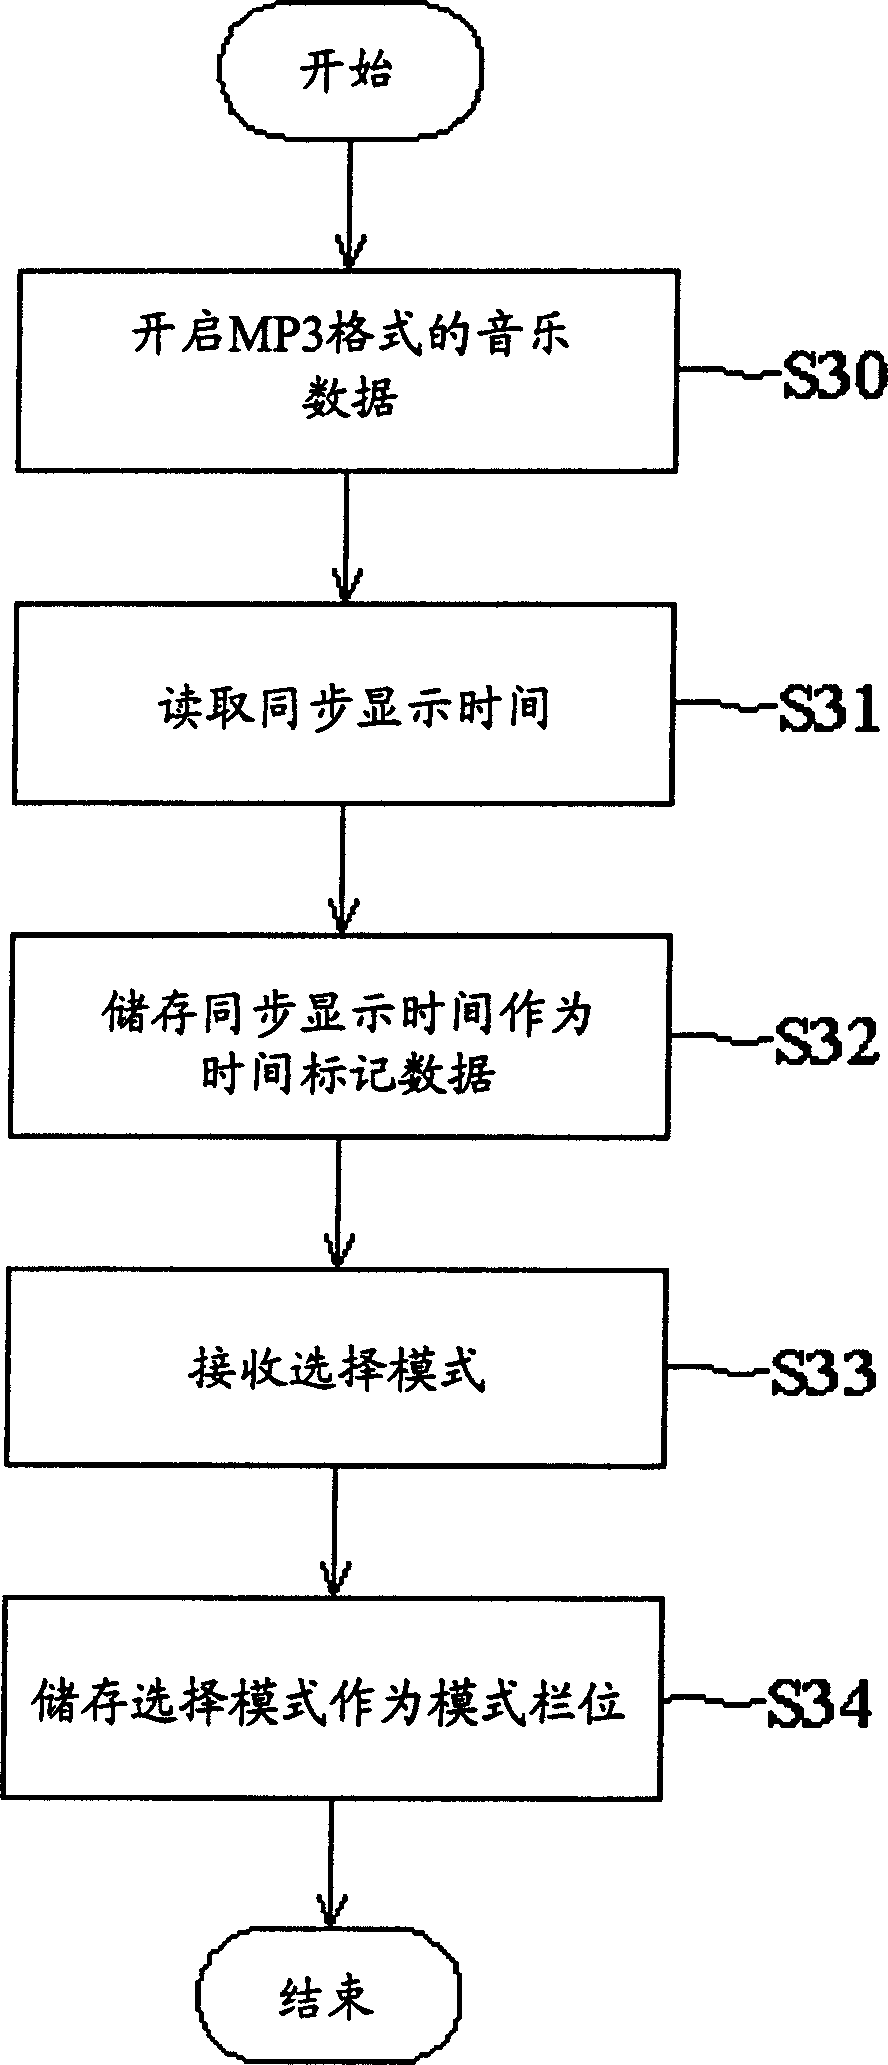 Data synchronous method definition data sychronous format method and memory medium